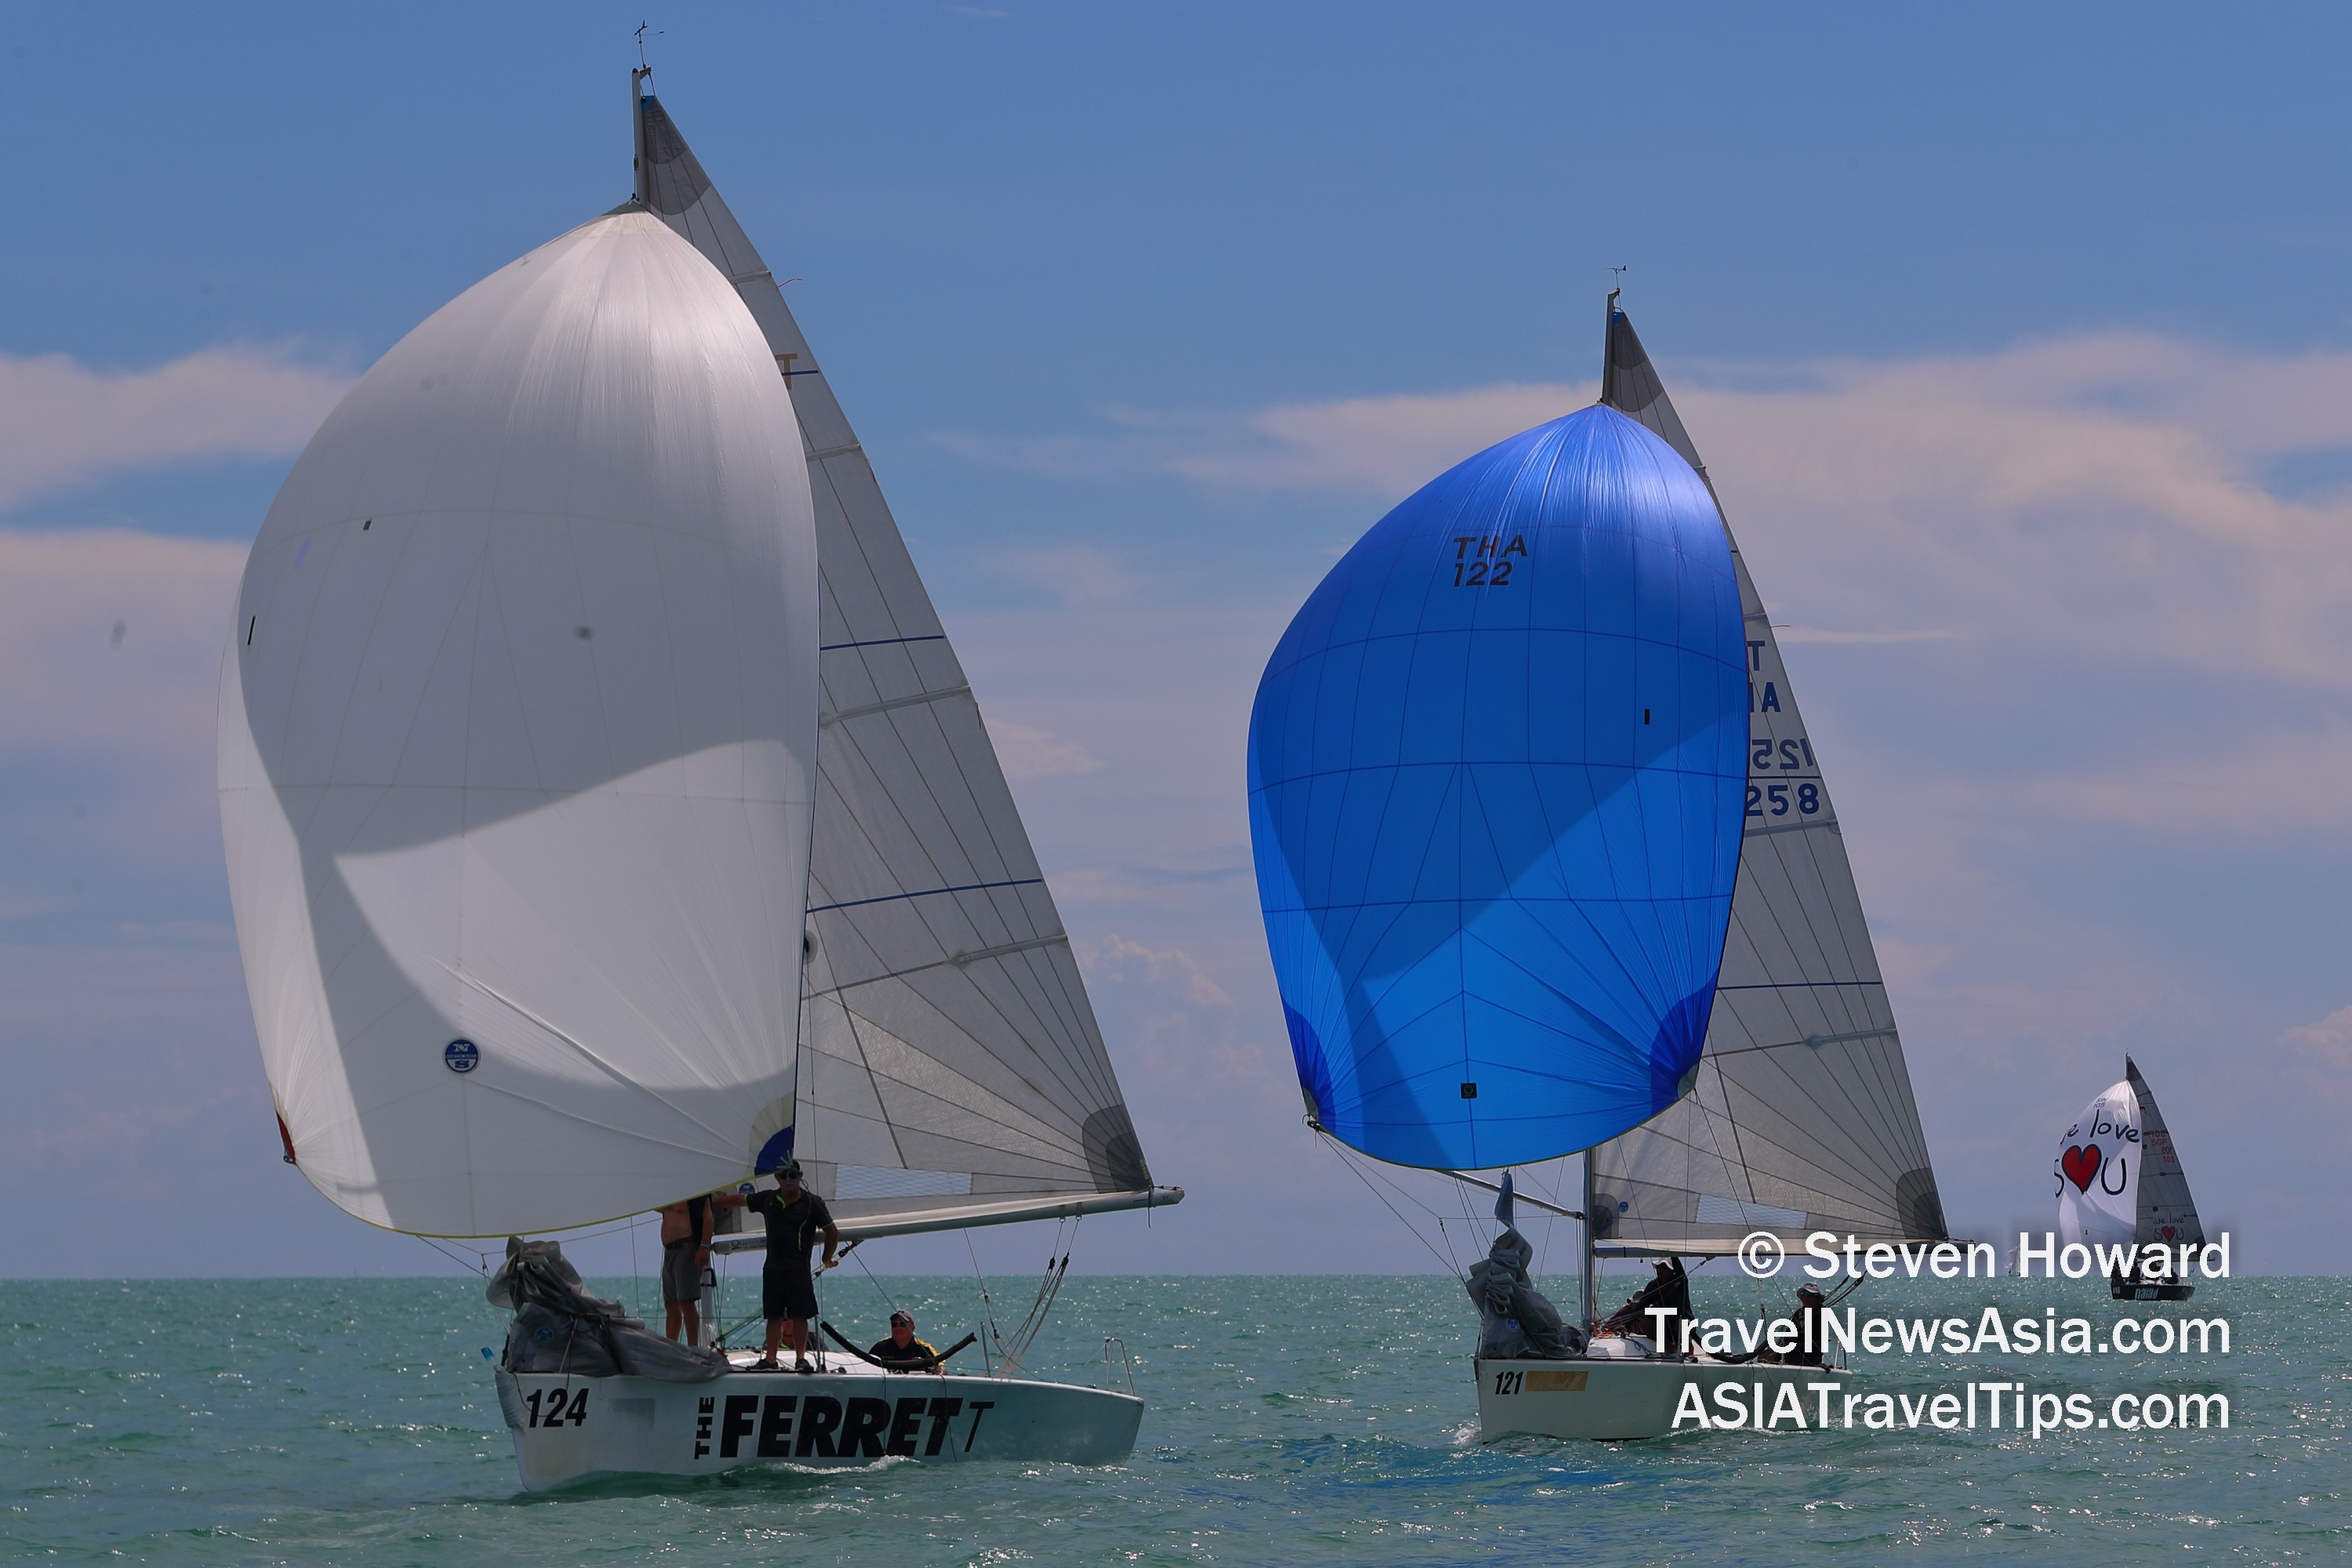 Inclusivity has been at the heart of Thailand's Top of the Gulf Regatta since it was first sailed in 2005, as organisers aim to support sailing across a diverse range of boat types, sizes, and sailor abilities. From Optimists and Lasers (Radial, Standard and 4.7), 29ers and 49ers, 420s and 470s, and beach catamarans, to ocean multihulls, keelboats, one-design 25-foot Platus and the radio controlled IOM class, organisers this year have added a Para Sailing class for the first time, using the S\V14 two-person dinghy. Picture by Steven Howard of TravelNewsAsia.com Click to enlarge.